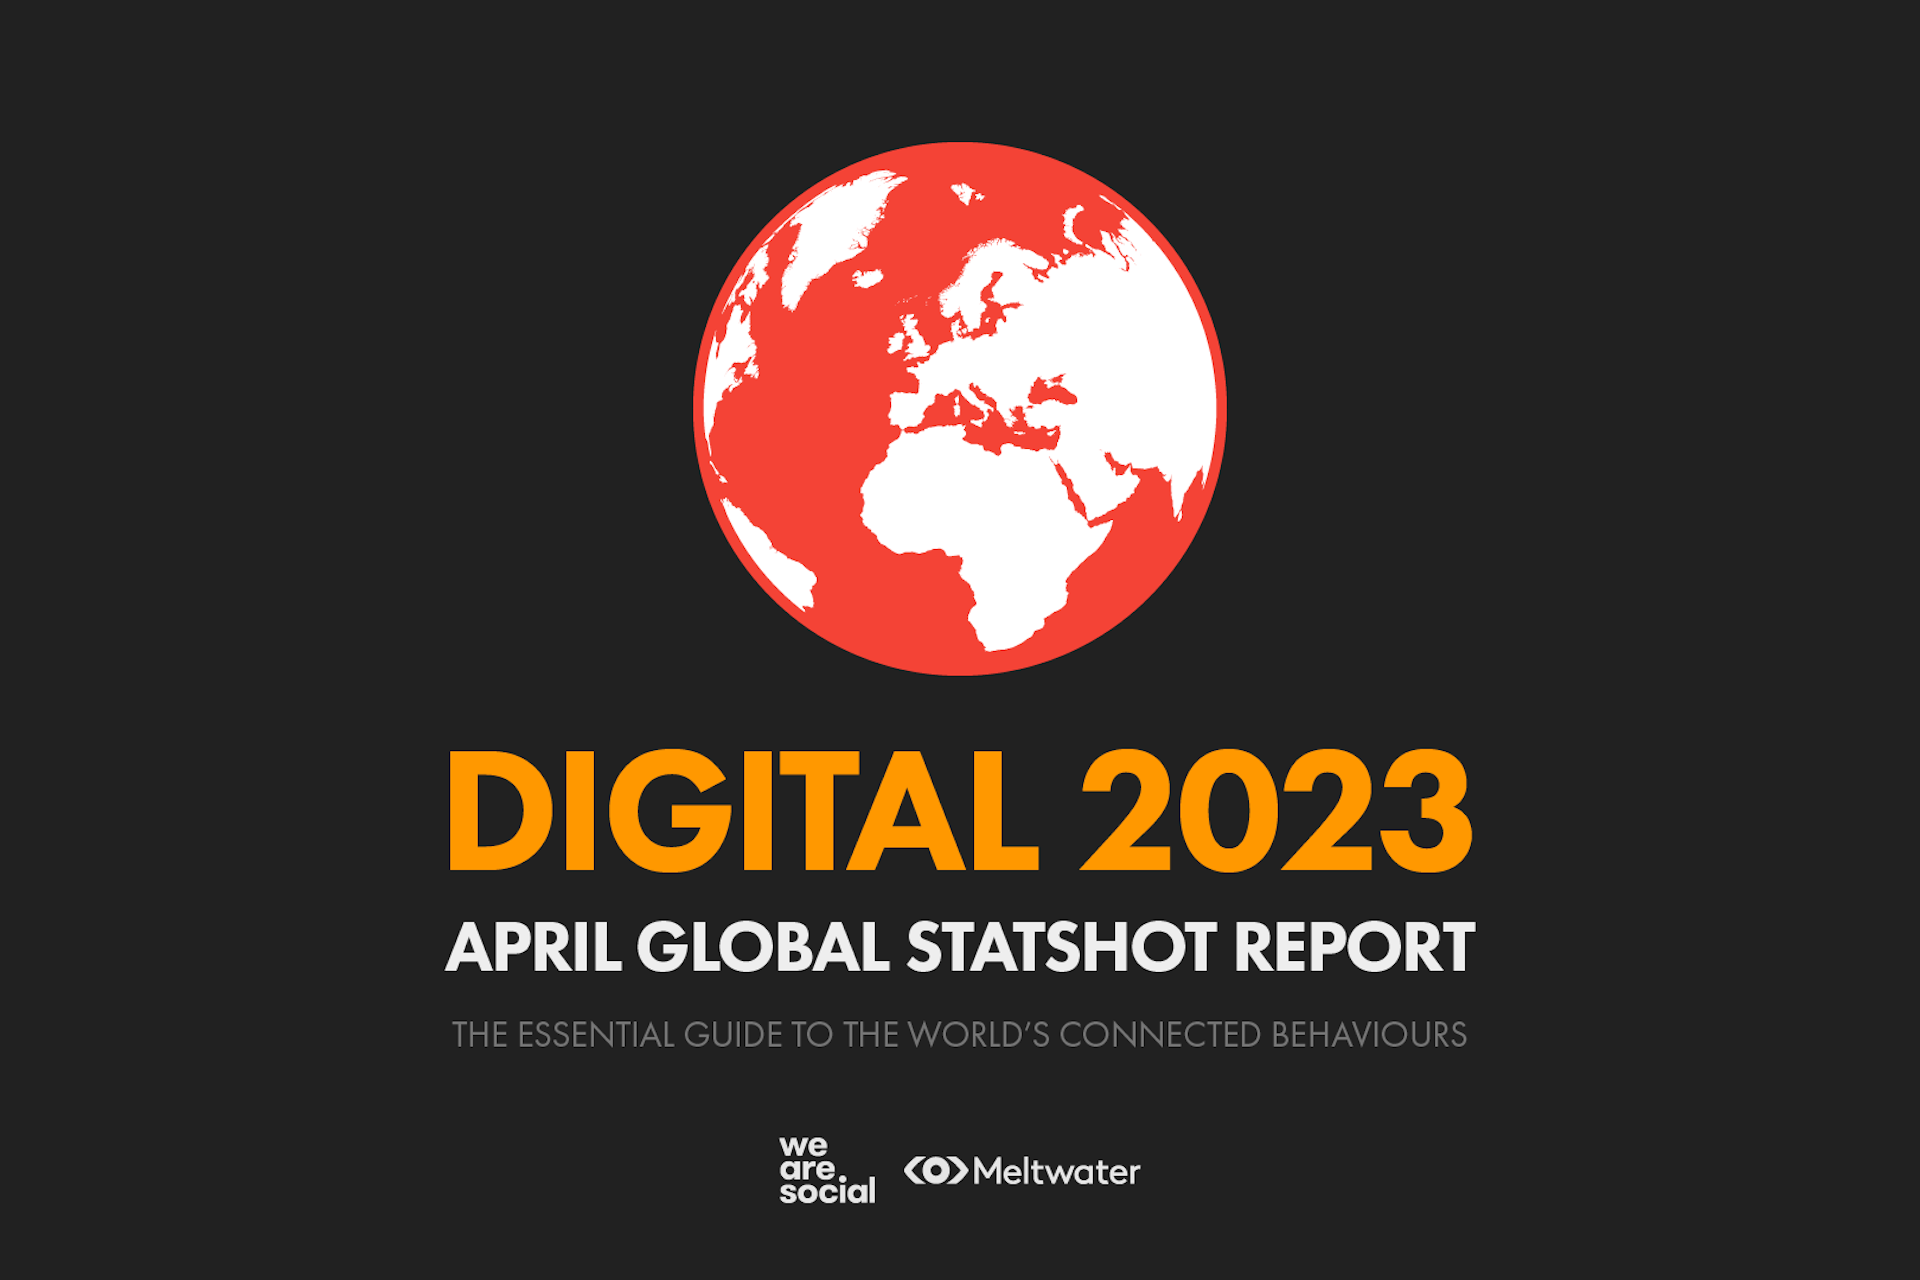 A red globe over the words Digital 2023 April Global Statshot Report, the Essential Guide to the World's Connected Behaviours